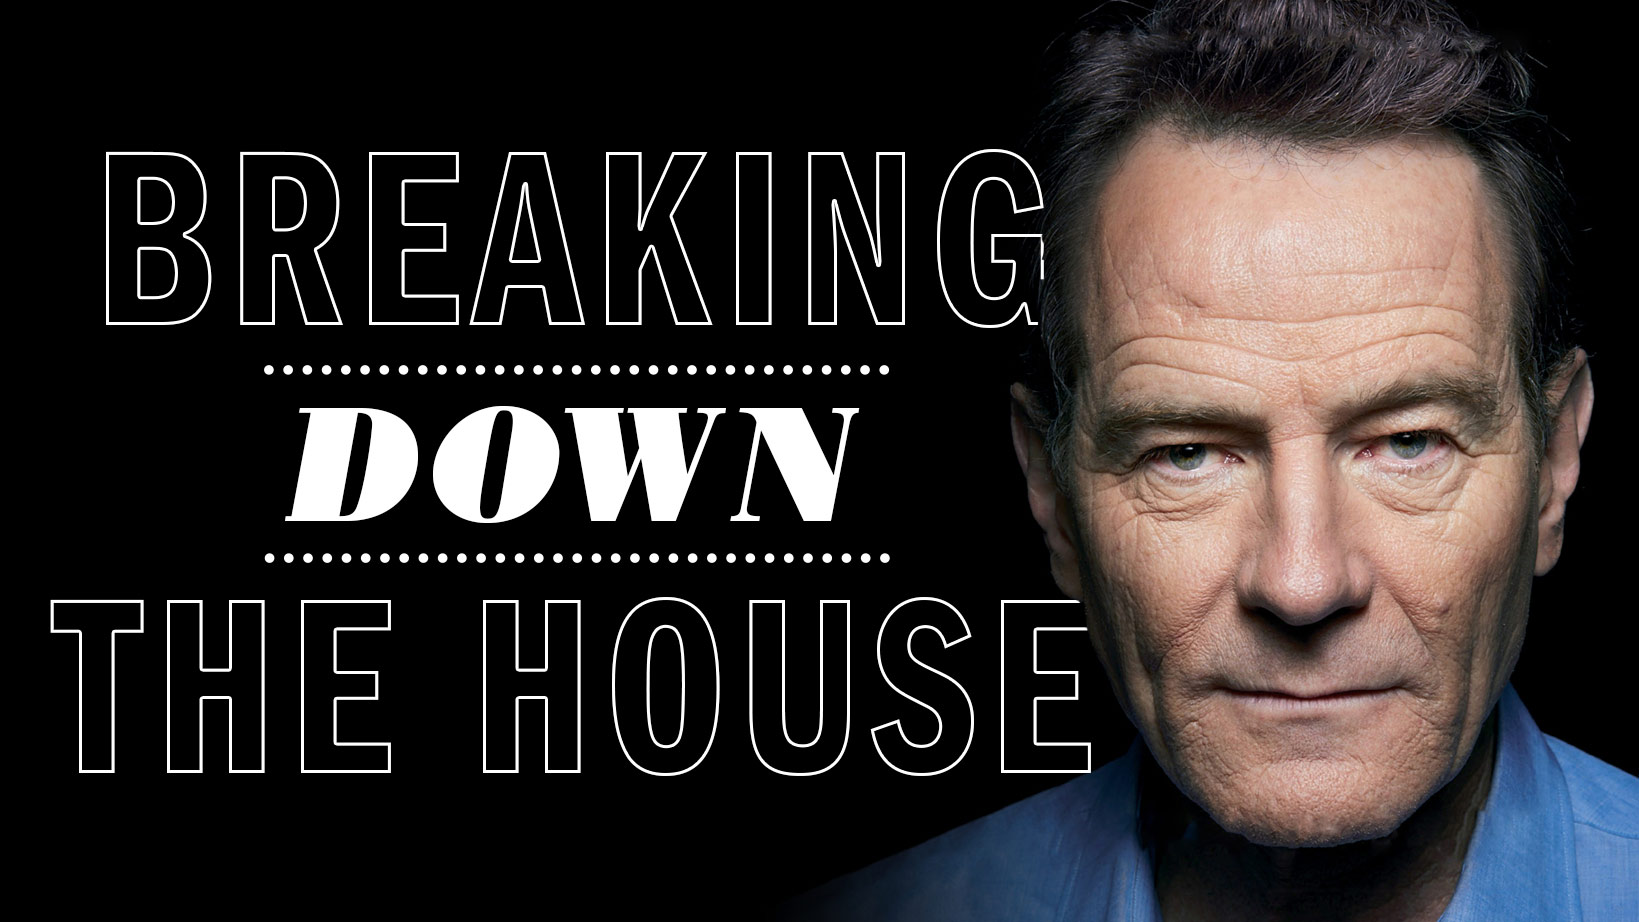 Bryan Cranston headshot with the text Breaking down the house